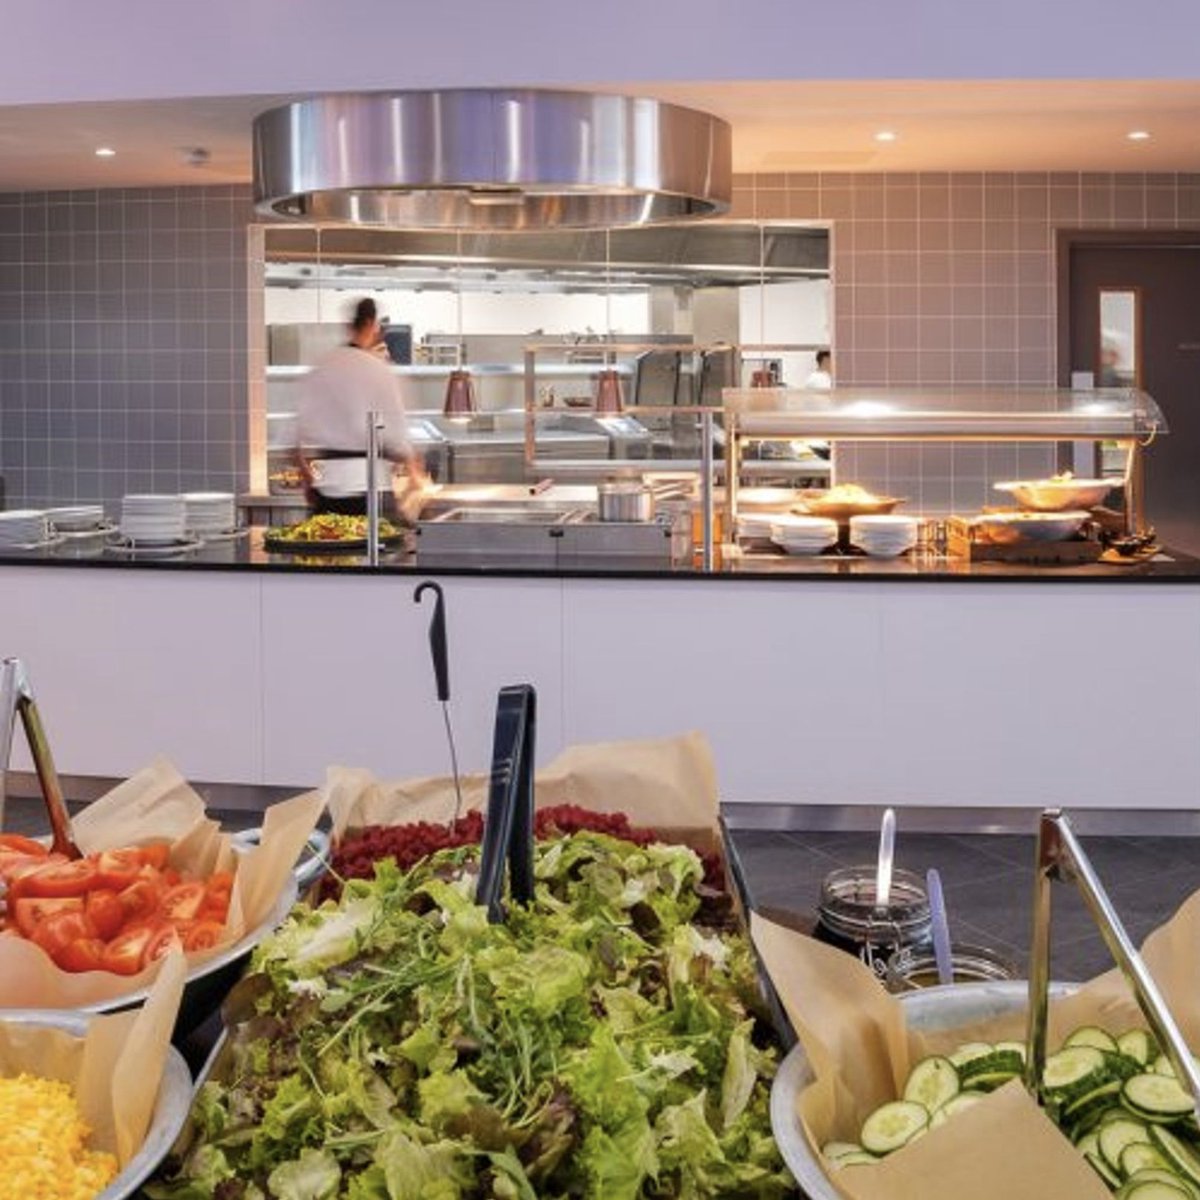 If you’re wanting your staff to come into the office more, have you considered an upgrade to your catering facilities? A great canteen and break out space can make face-to-face meetings a joy. Speak to our team for your next catering design. #design #ceba cebasolutions.co.uk/contact